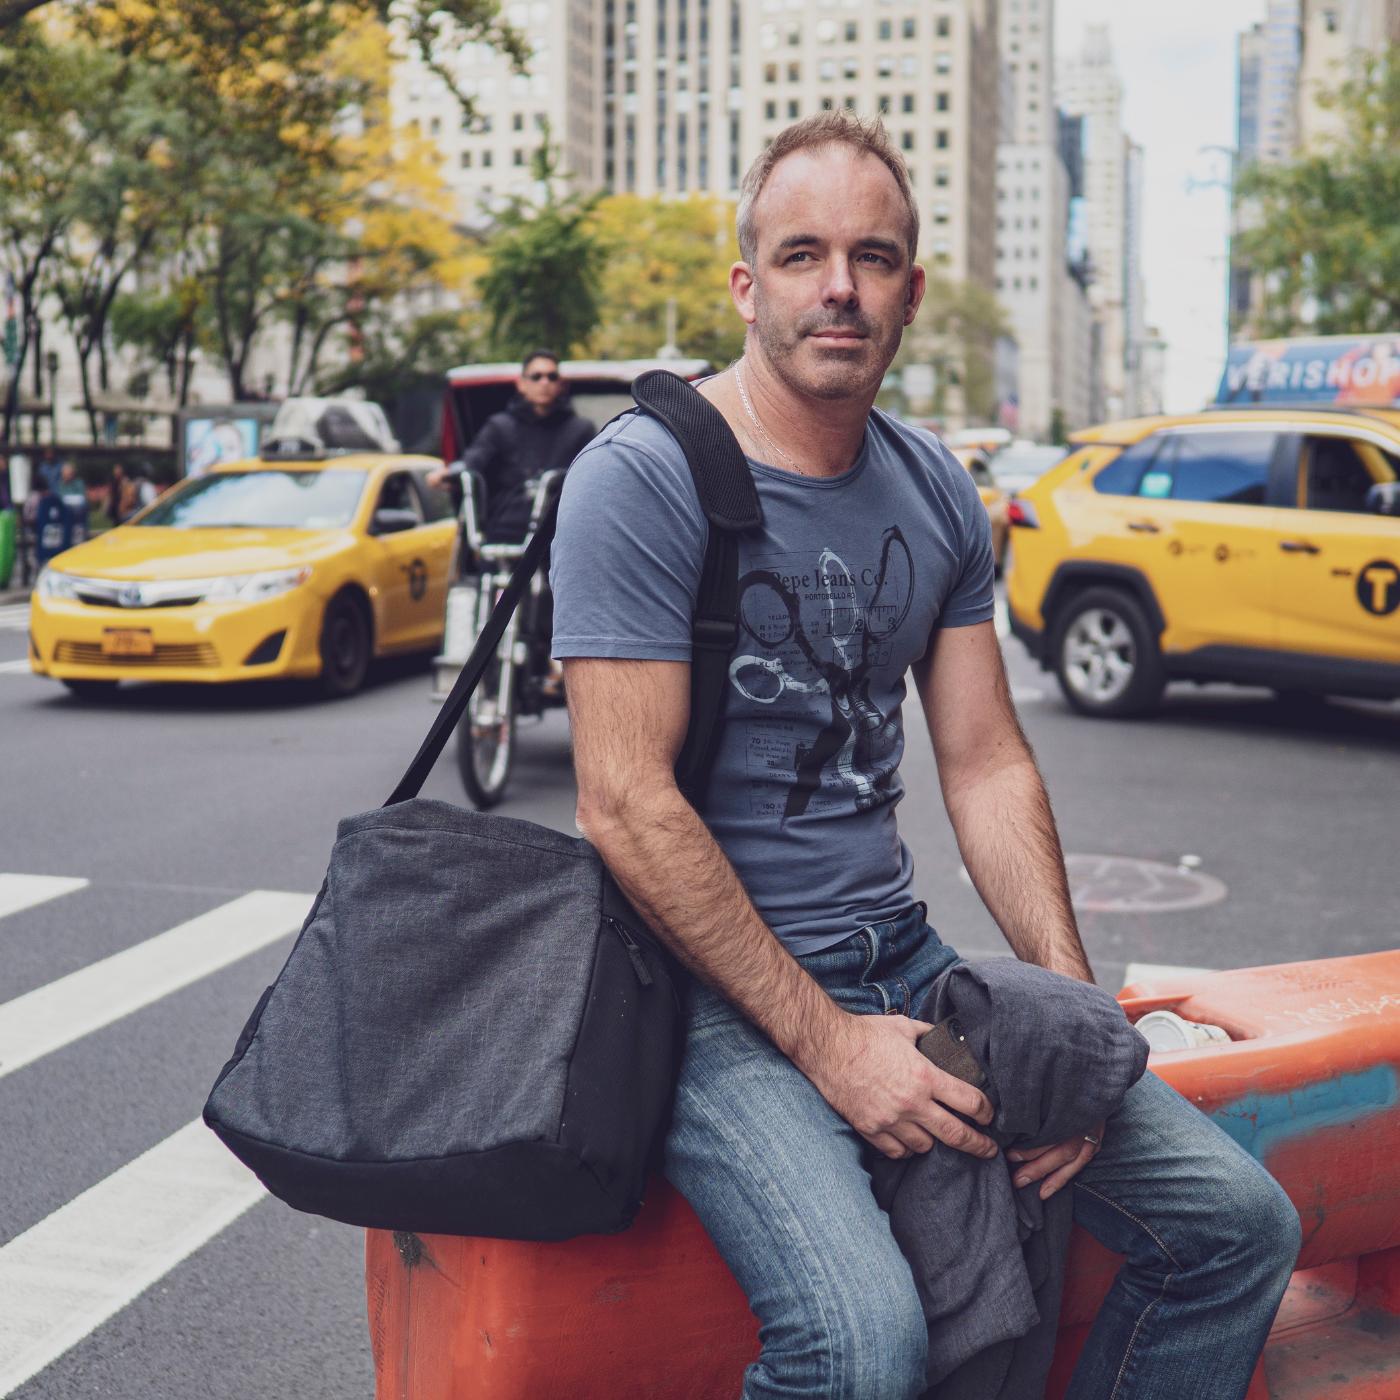 Tom Butler sat in a New York road with yellow taxis in the background